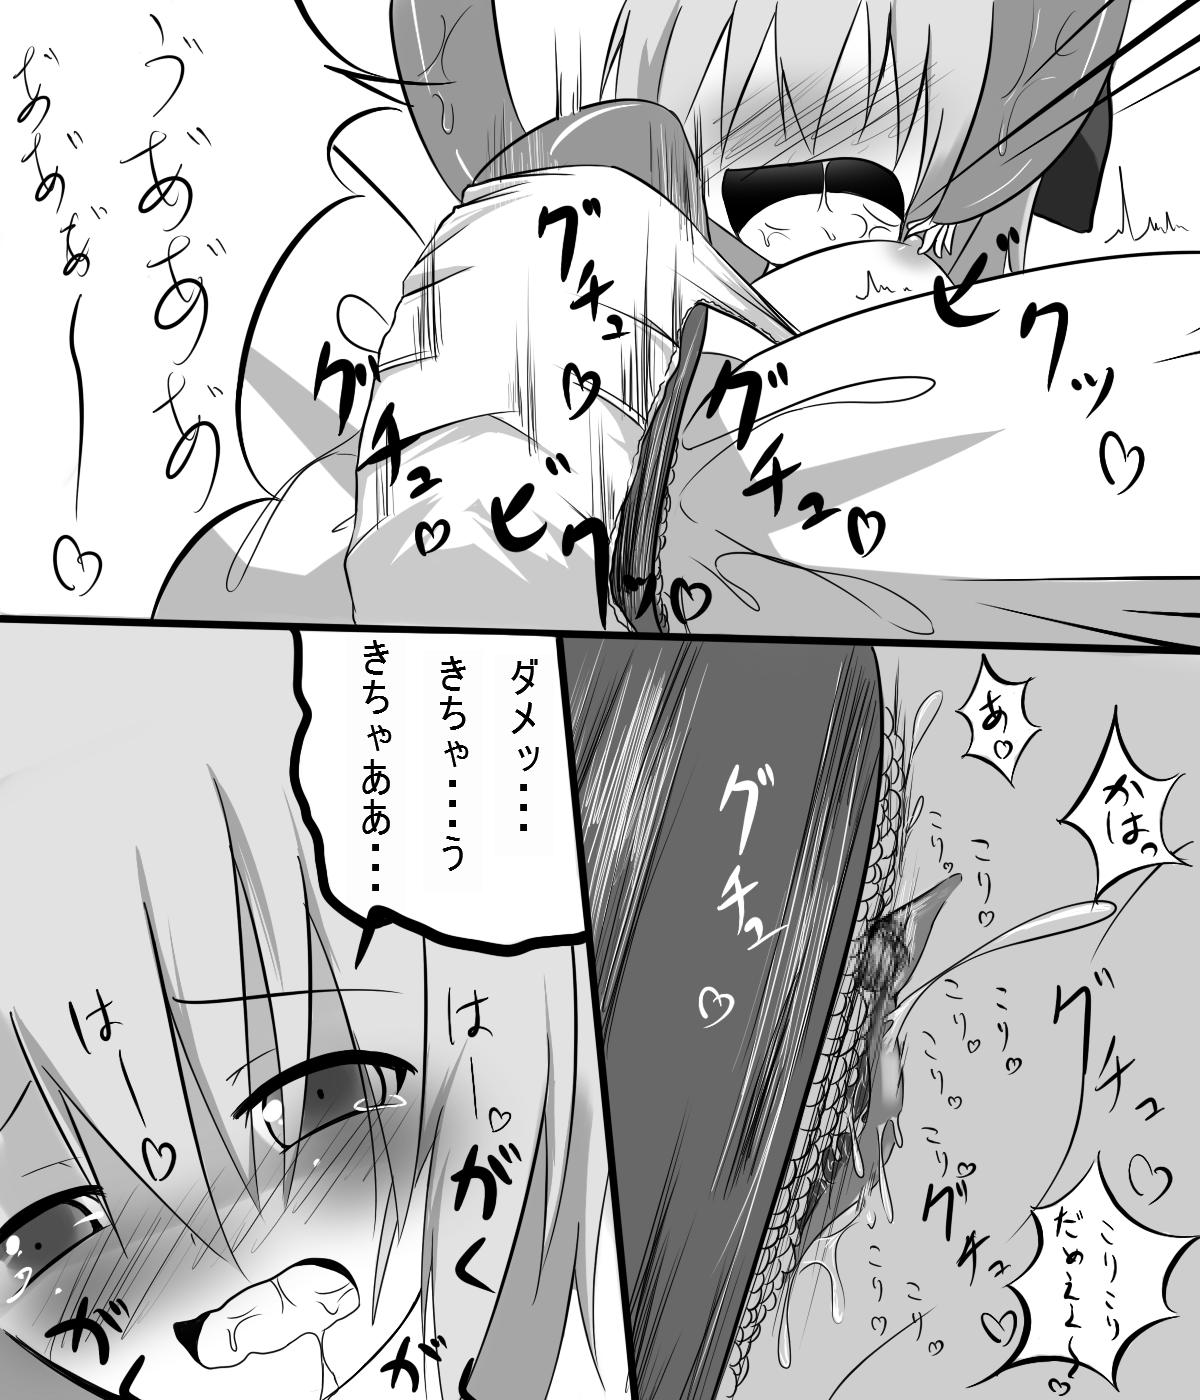 Sharing ﾀﾀﾞ同人「チルノが触手に　豆・弄られる」完成 - Touhou project Freeporn - Page 5